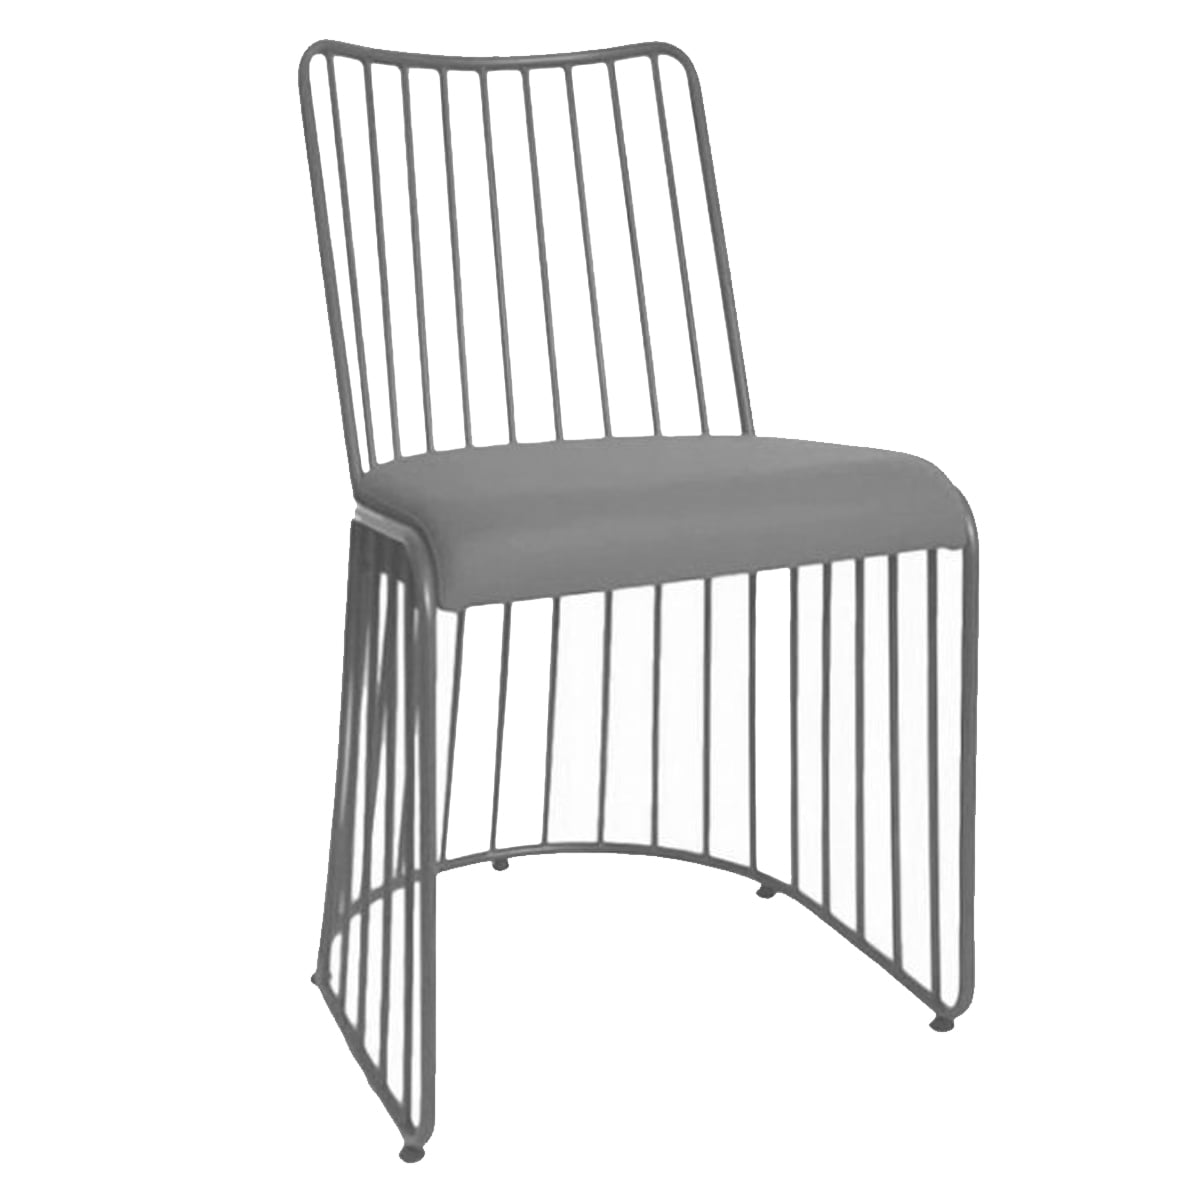 Upholstered Metal Chair | Hotel | Coffee Shop | Restaurant | Food Court